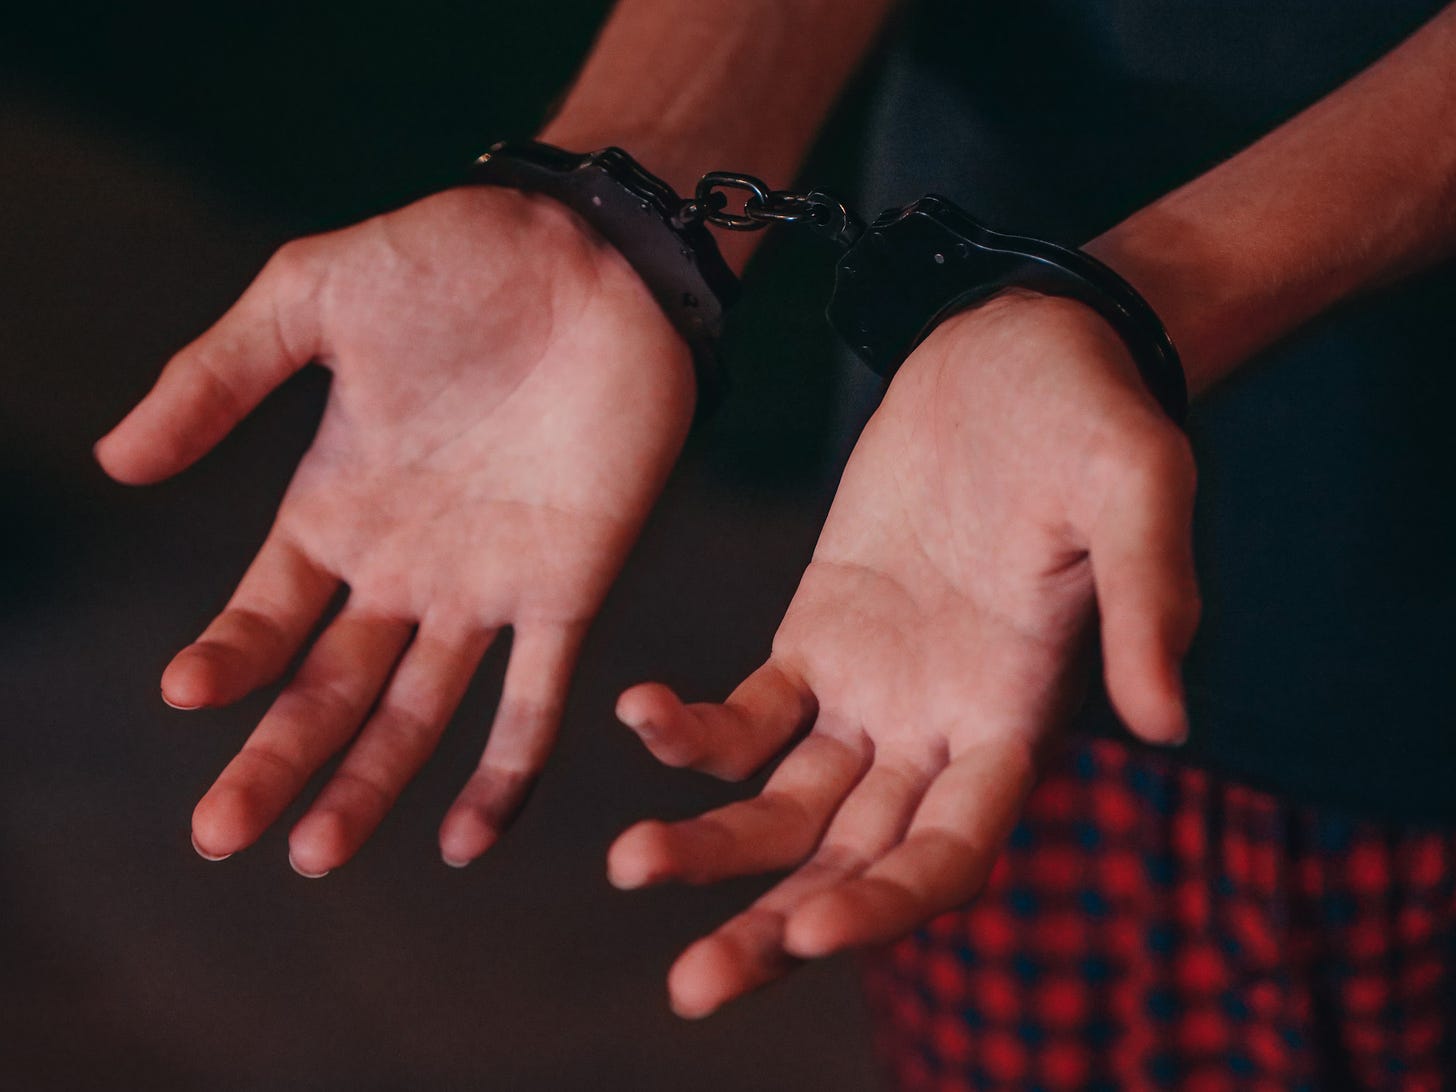 A person wearing handcuffs.